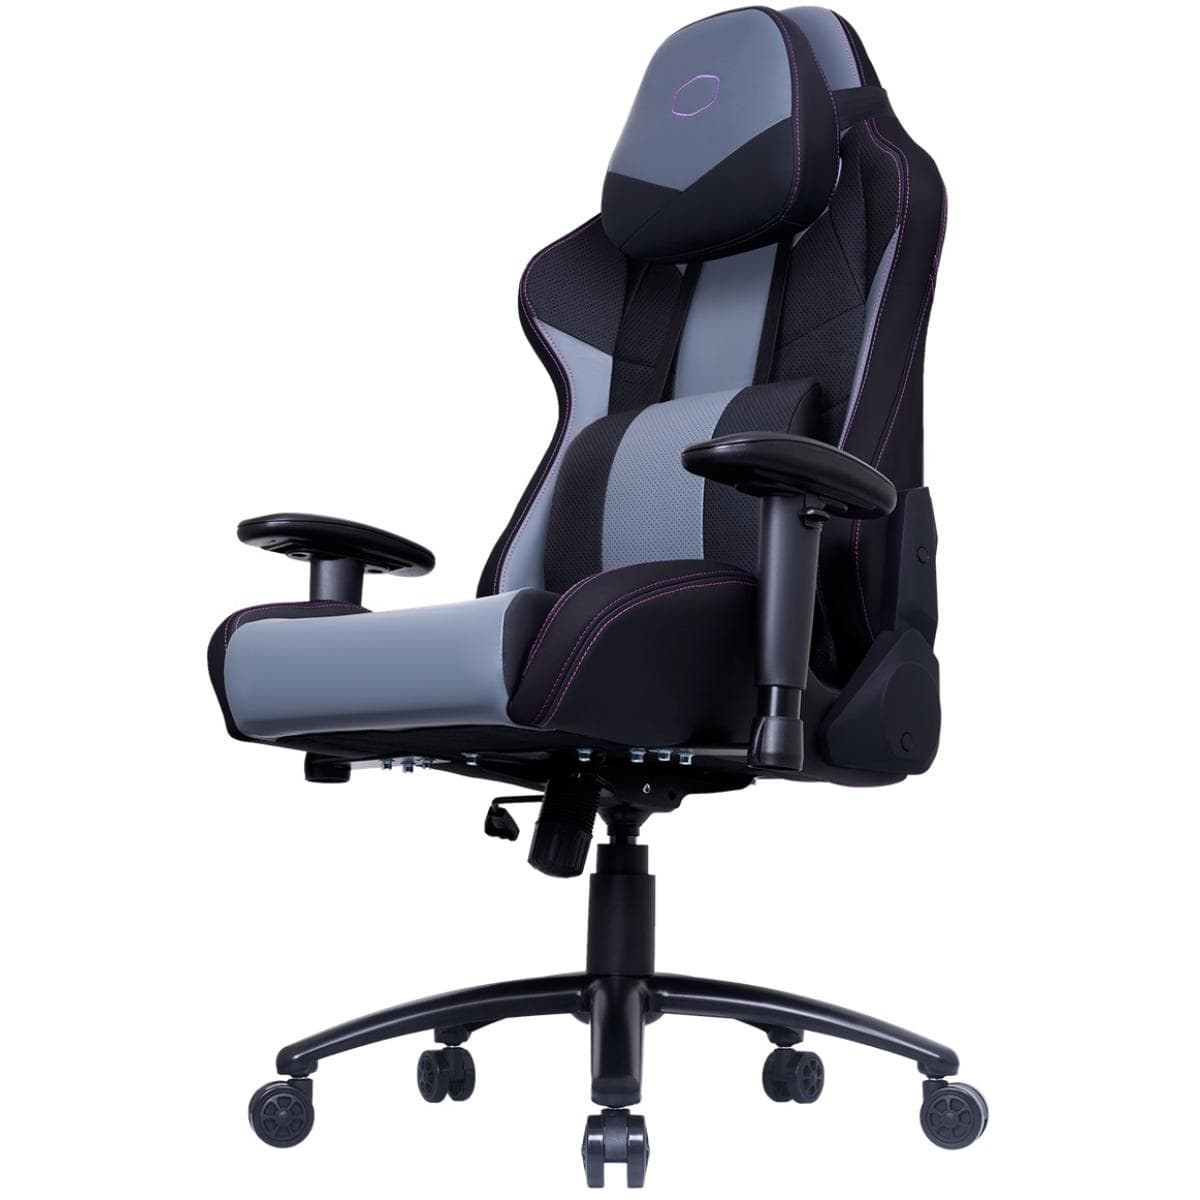 ASUS Gaming Chairs Cooler Master Caliber R3 Gaming Chair (Black -Purple), Steel Frame, Ultra Comfortable Memory Foam & PU, 2D Armrest, Up To 180° Recline & 150KG Max Weight Load